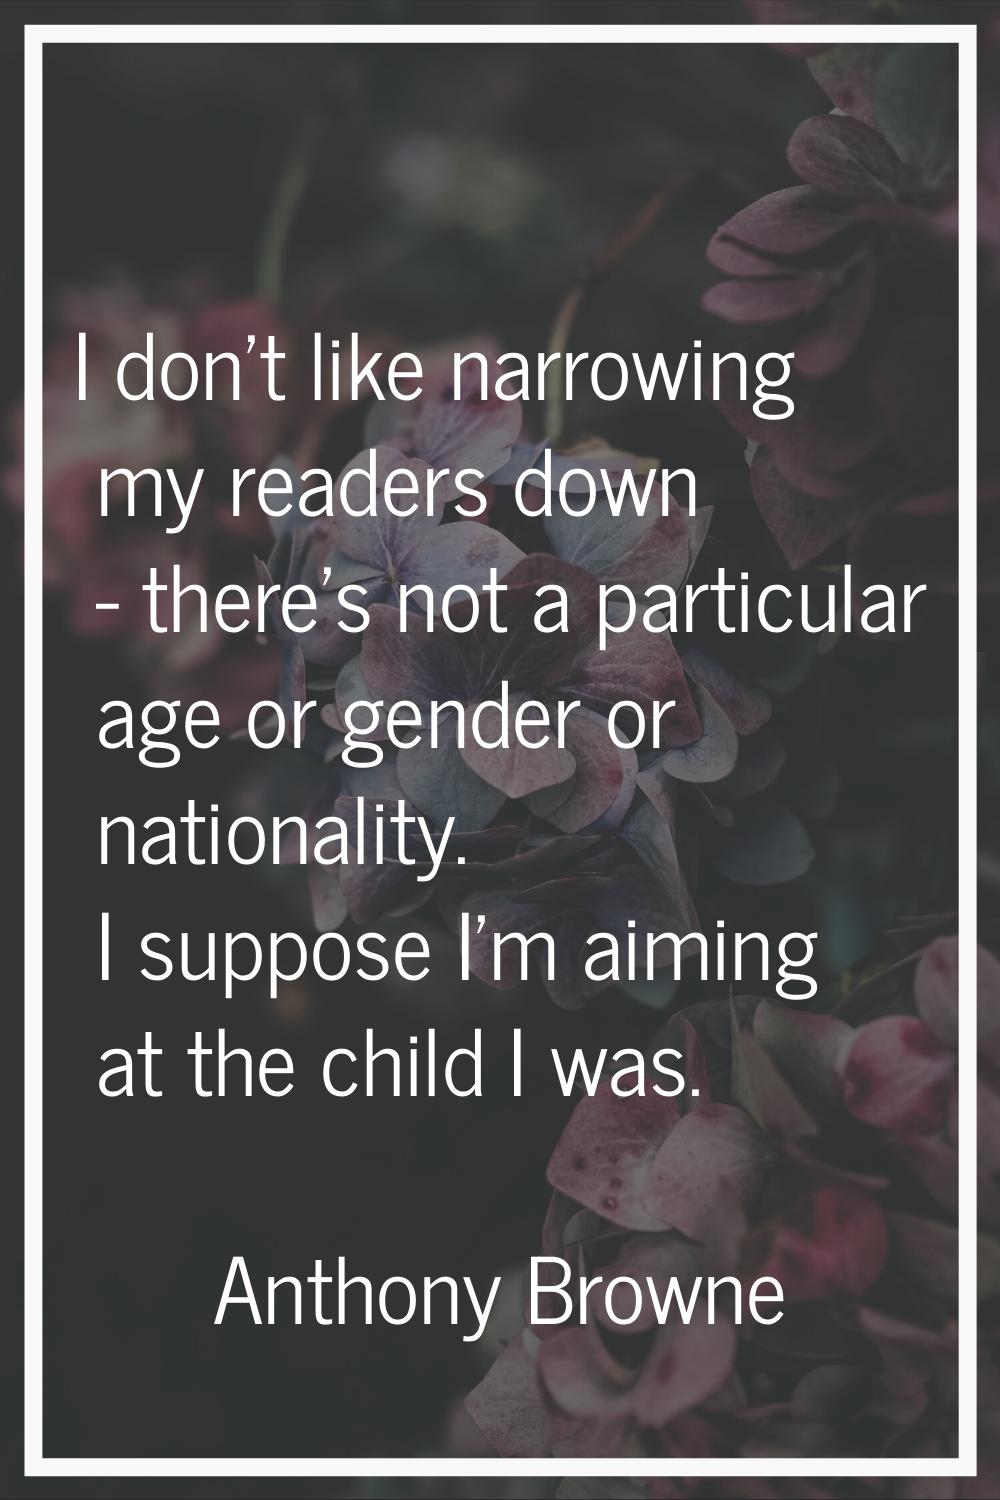 I don't like narrowing my readers down - there's not a particular age or gender or nationality. I s